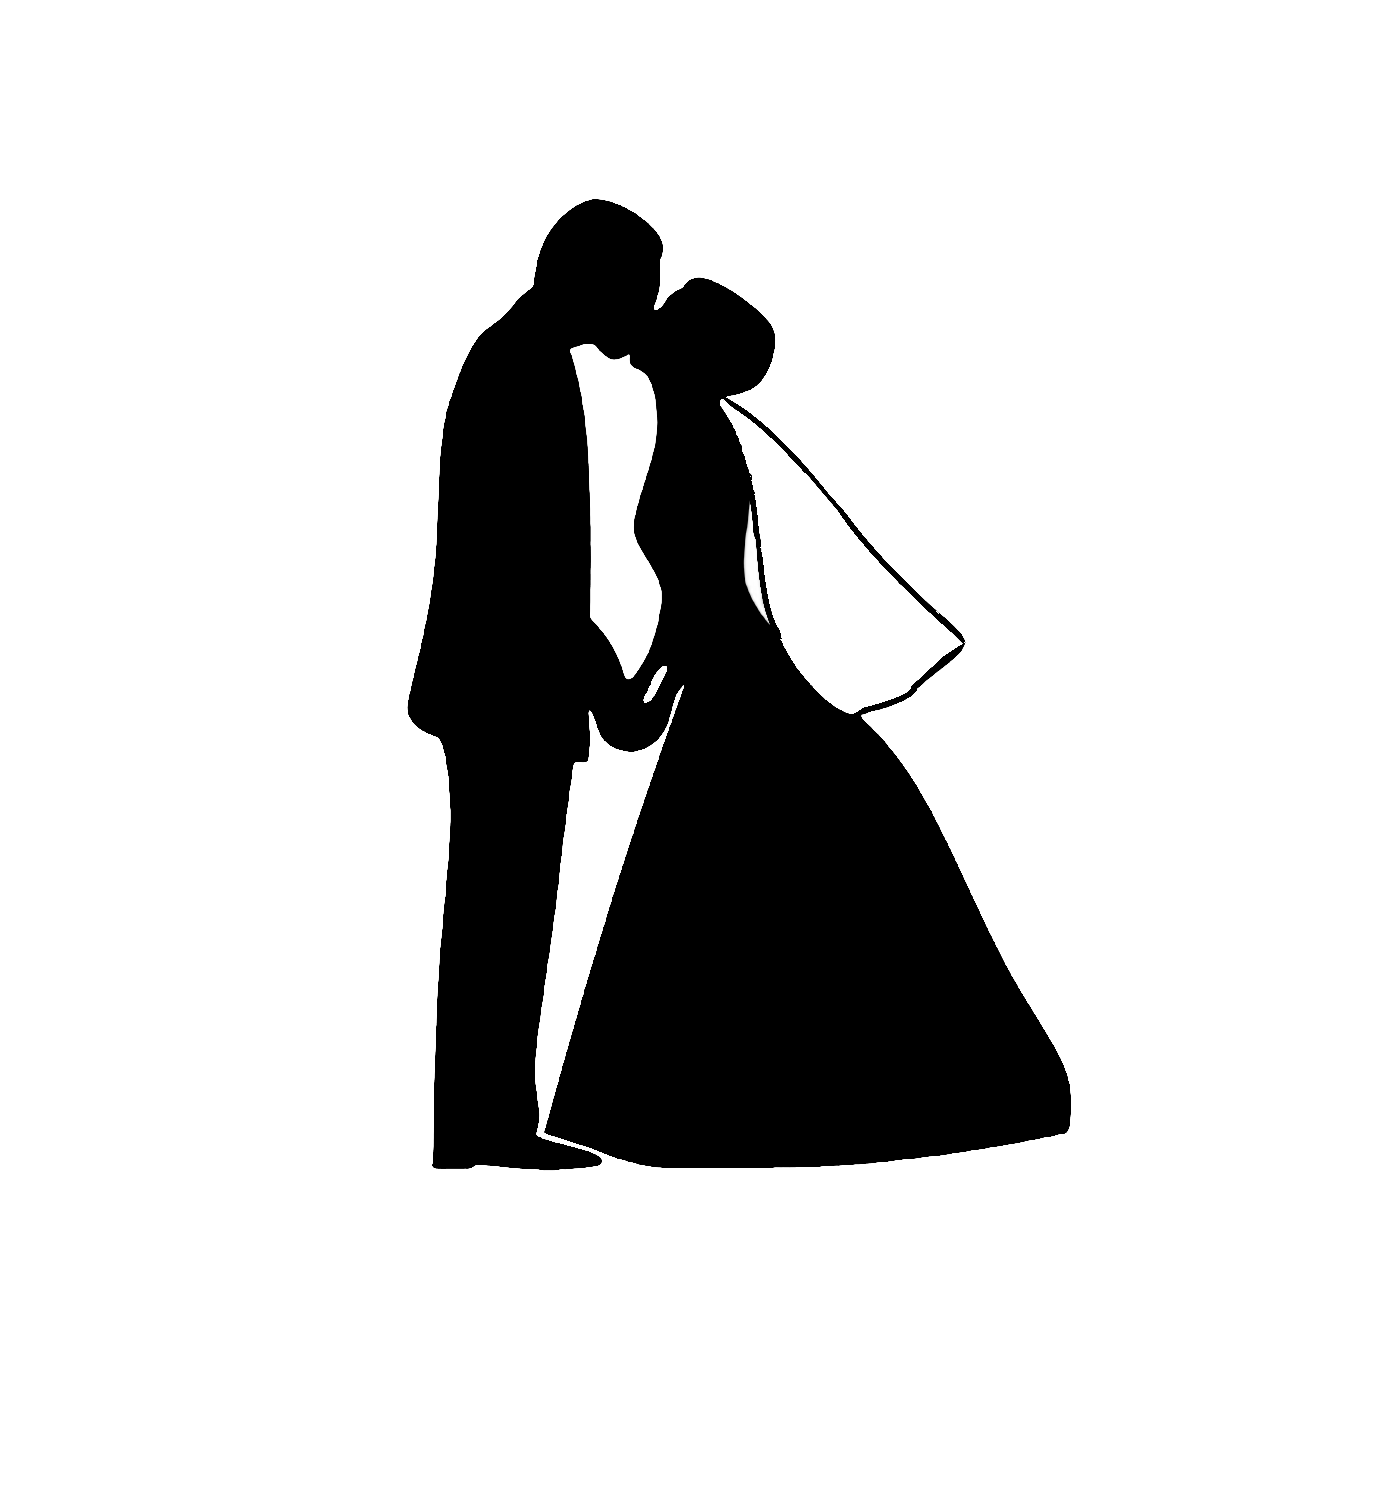 Bride and Groom Silhouette Vector Graphic | Free Vector Graphics ...